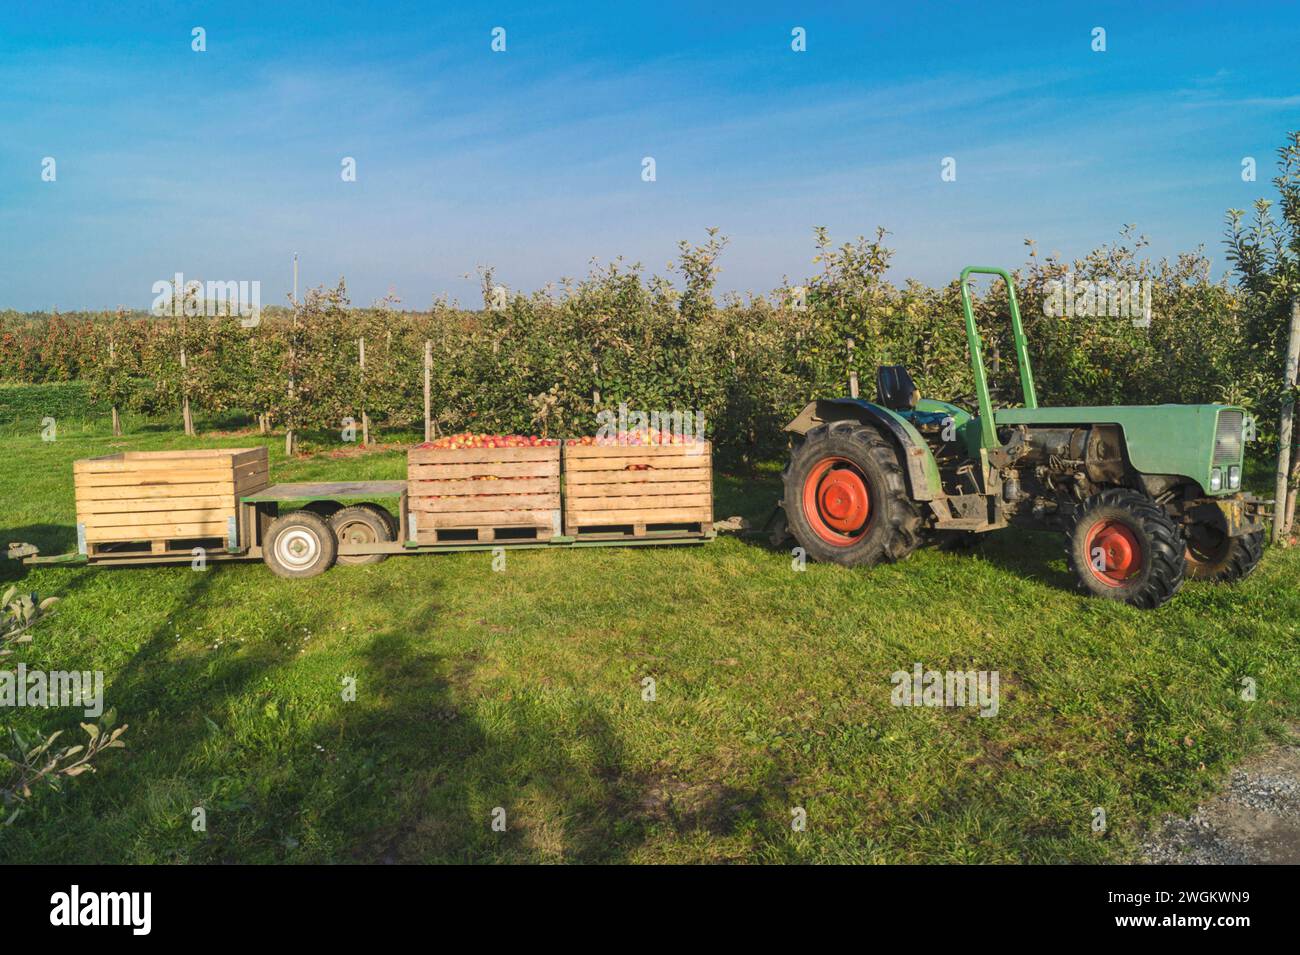 apple tree (Malus domestica), harvested apples in large wooden crates on an apple orchard, apple harvest, Germany Stock Photo